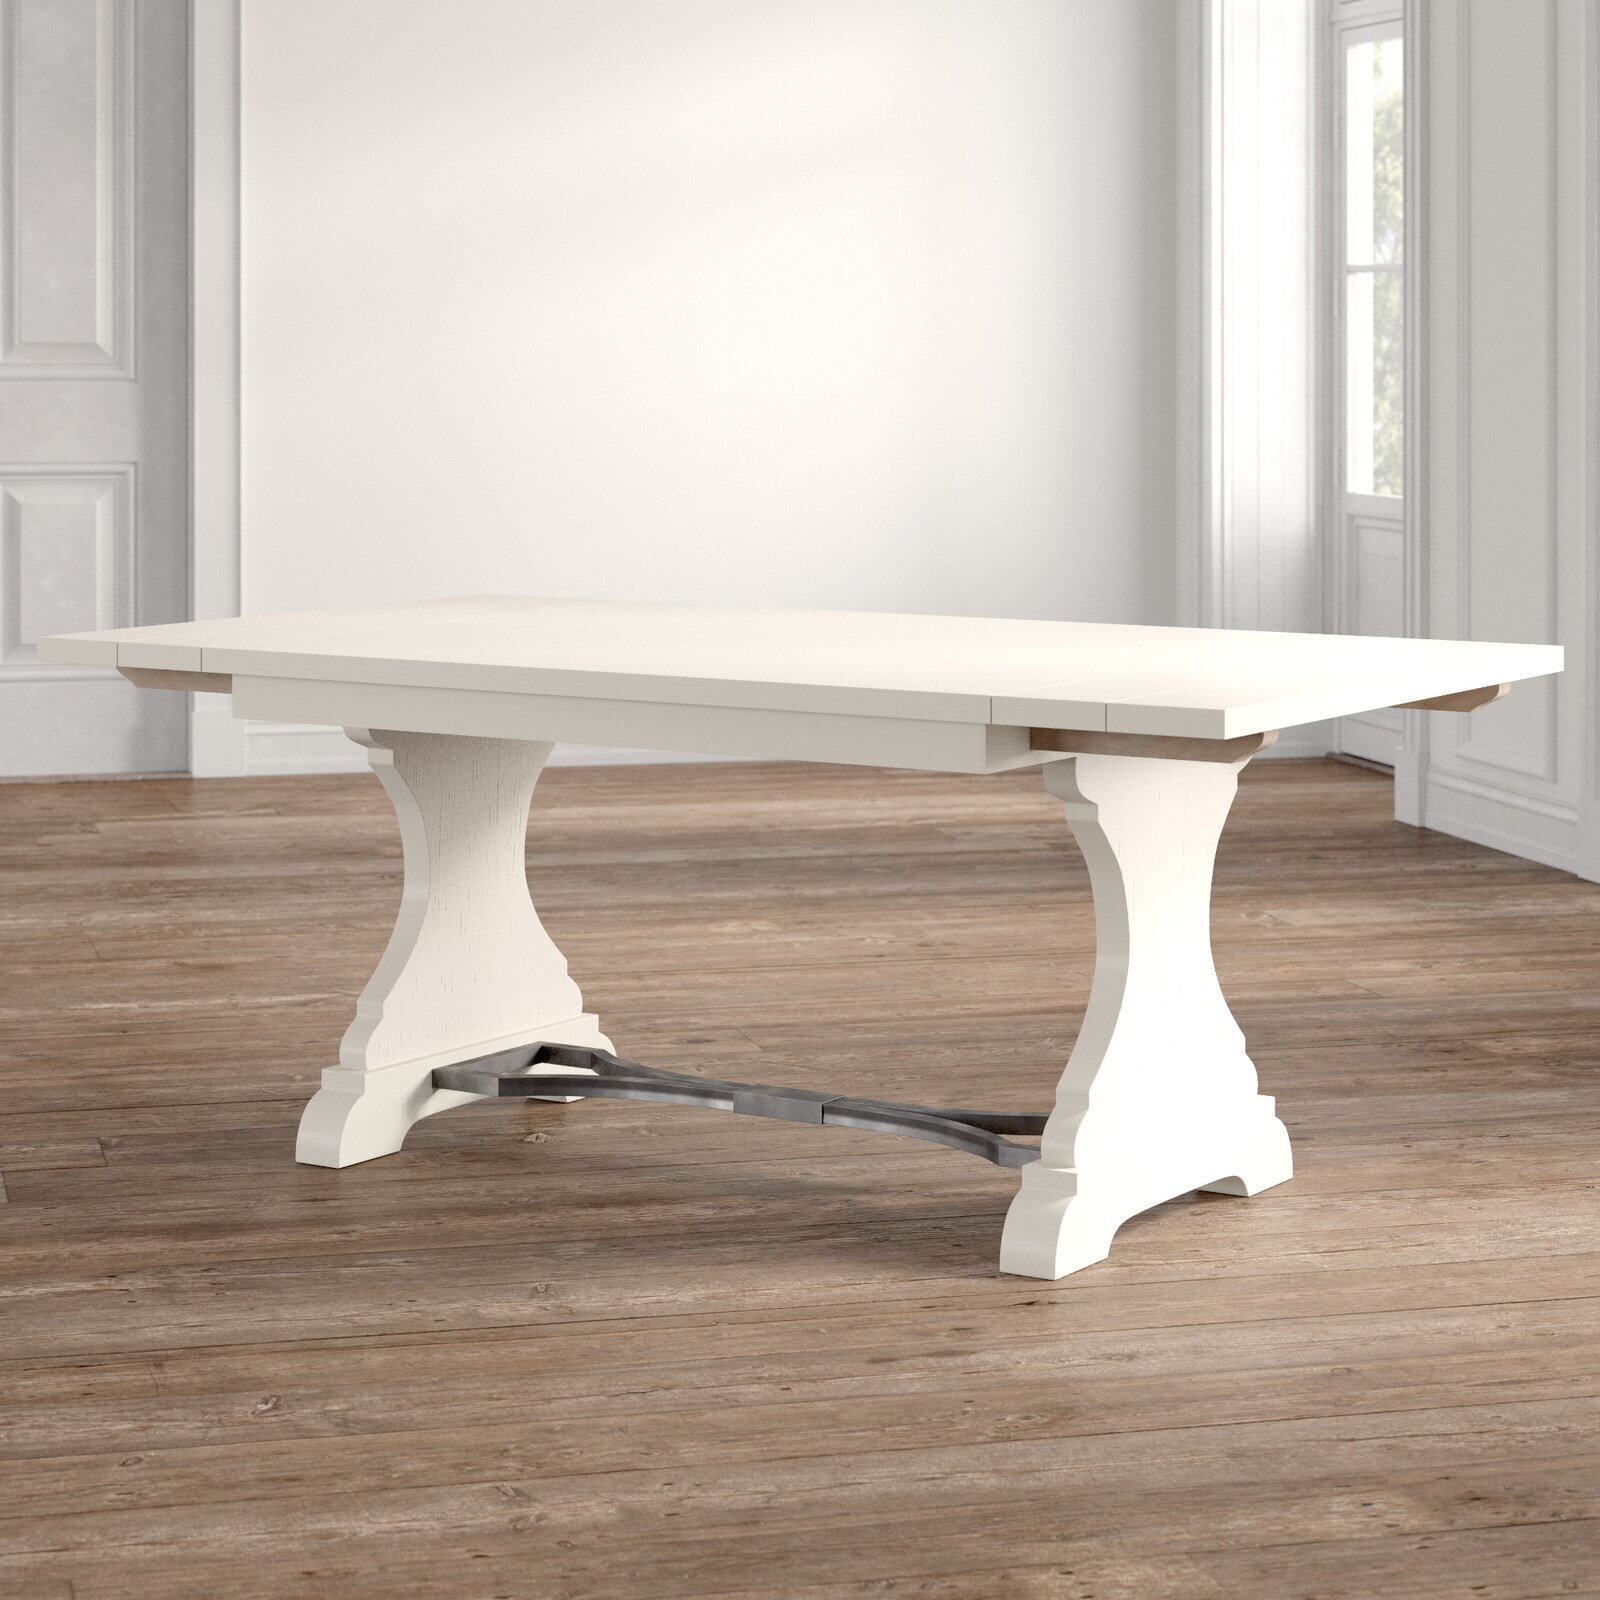 Trestle style Distressed Dining Table